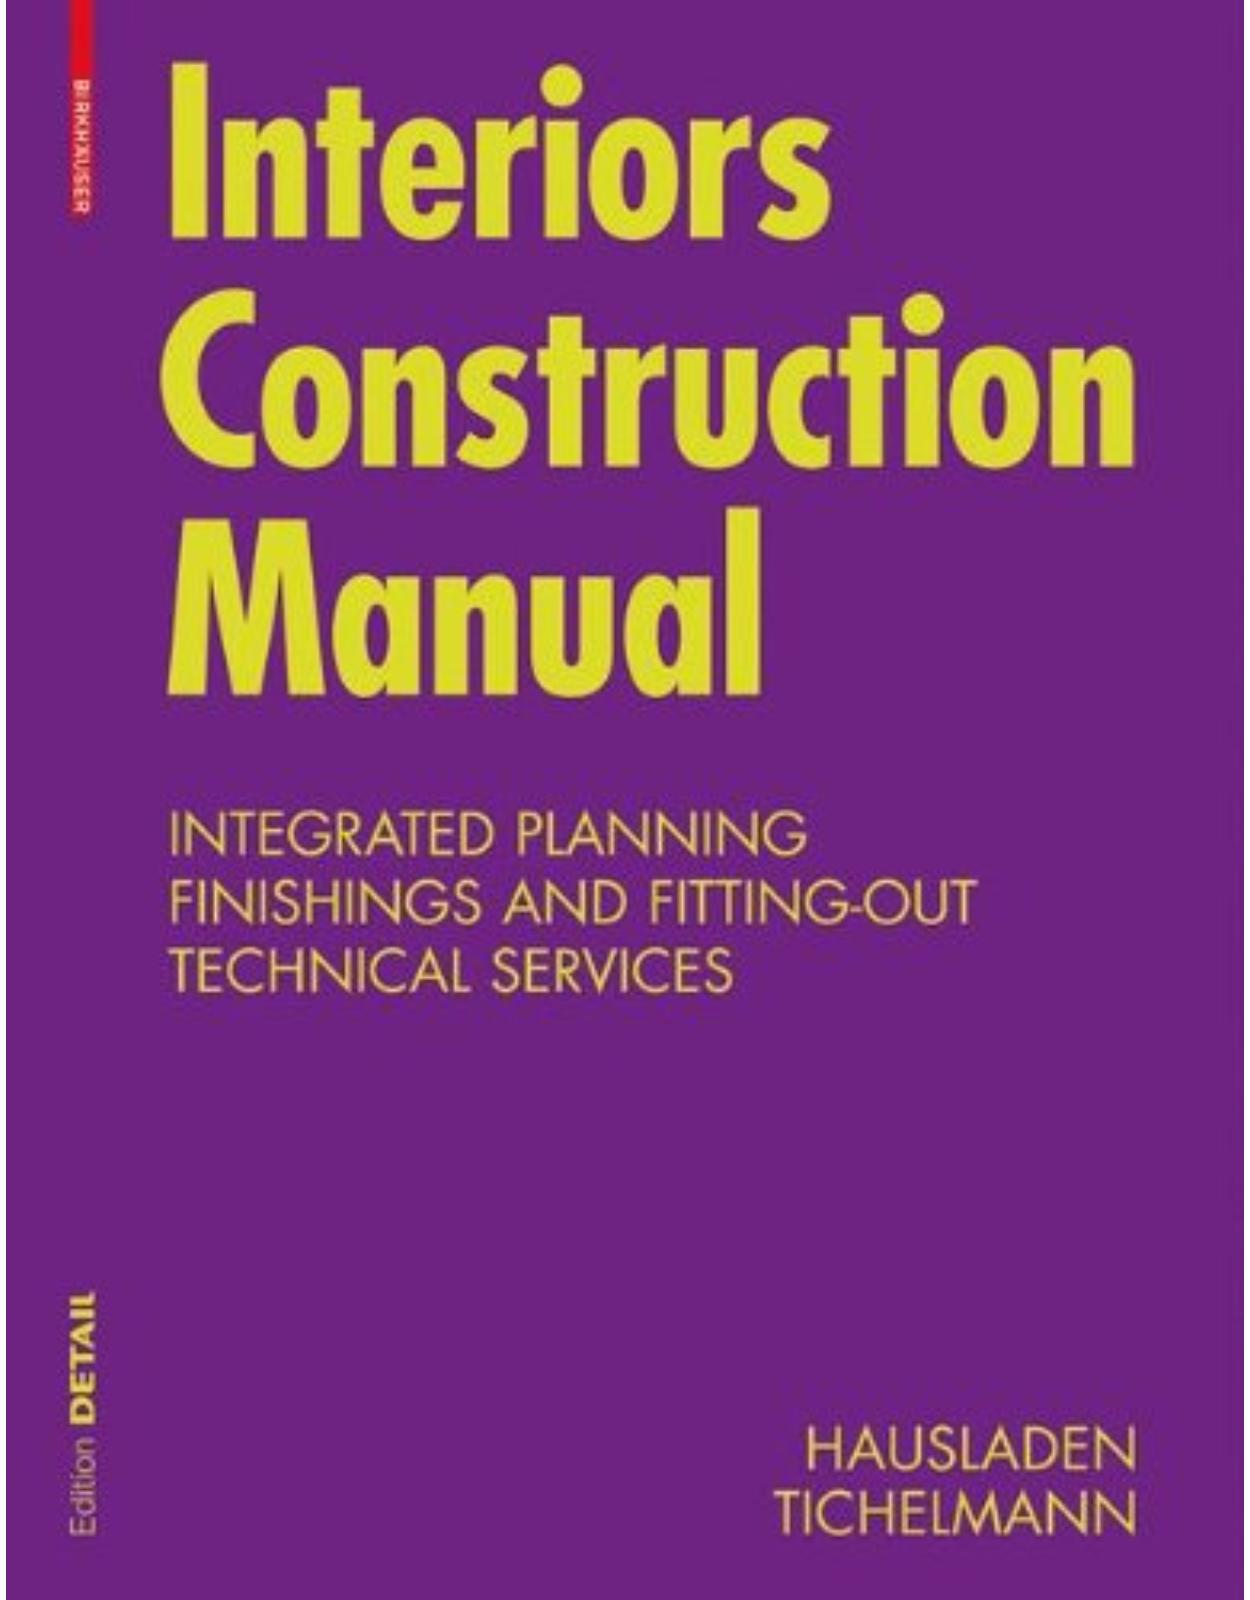 Interiors Construction Manual: Integrated Planning, Finishings and Fitting-Out, Technical Services (Konstruktionsatlanten)